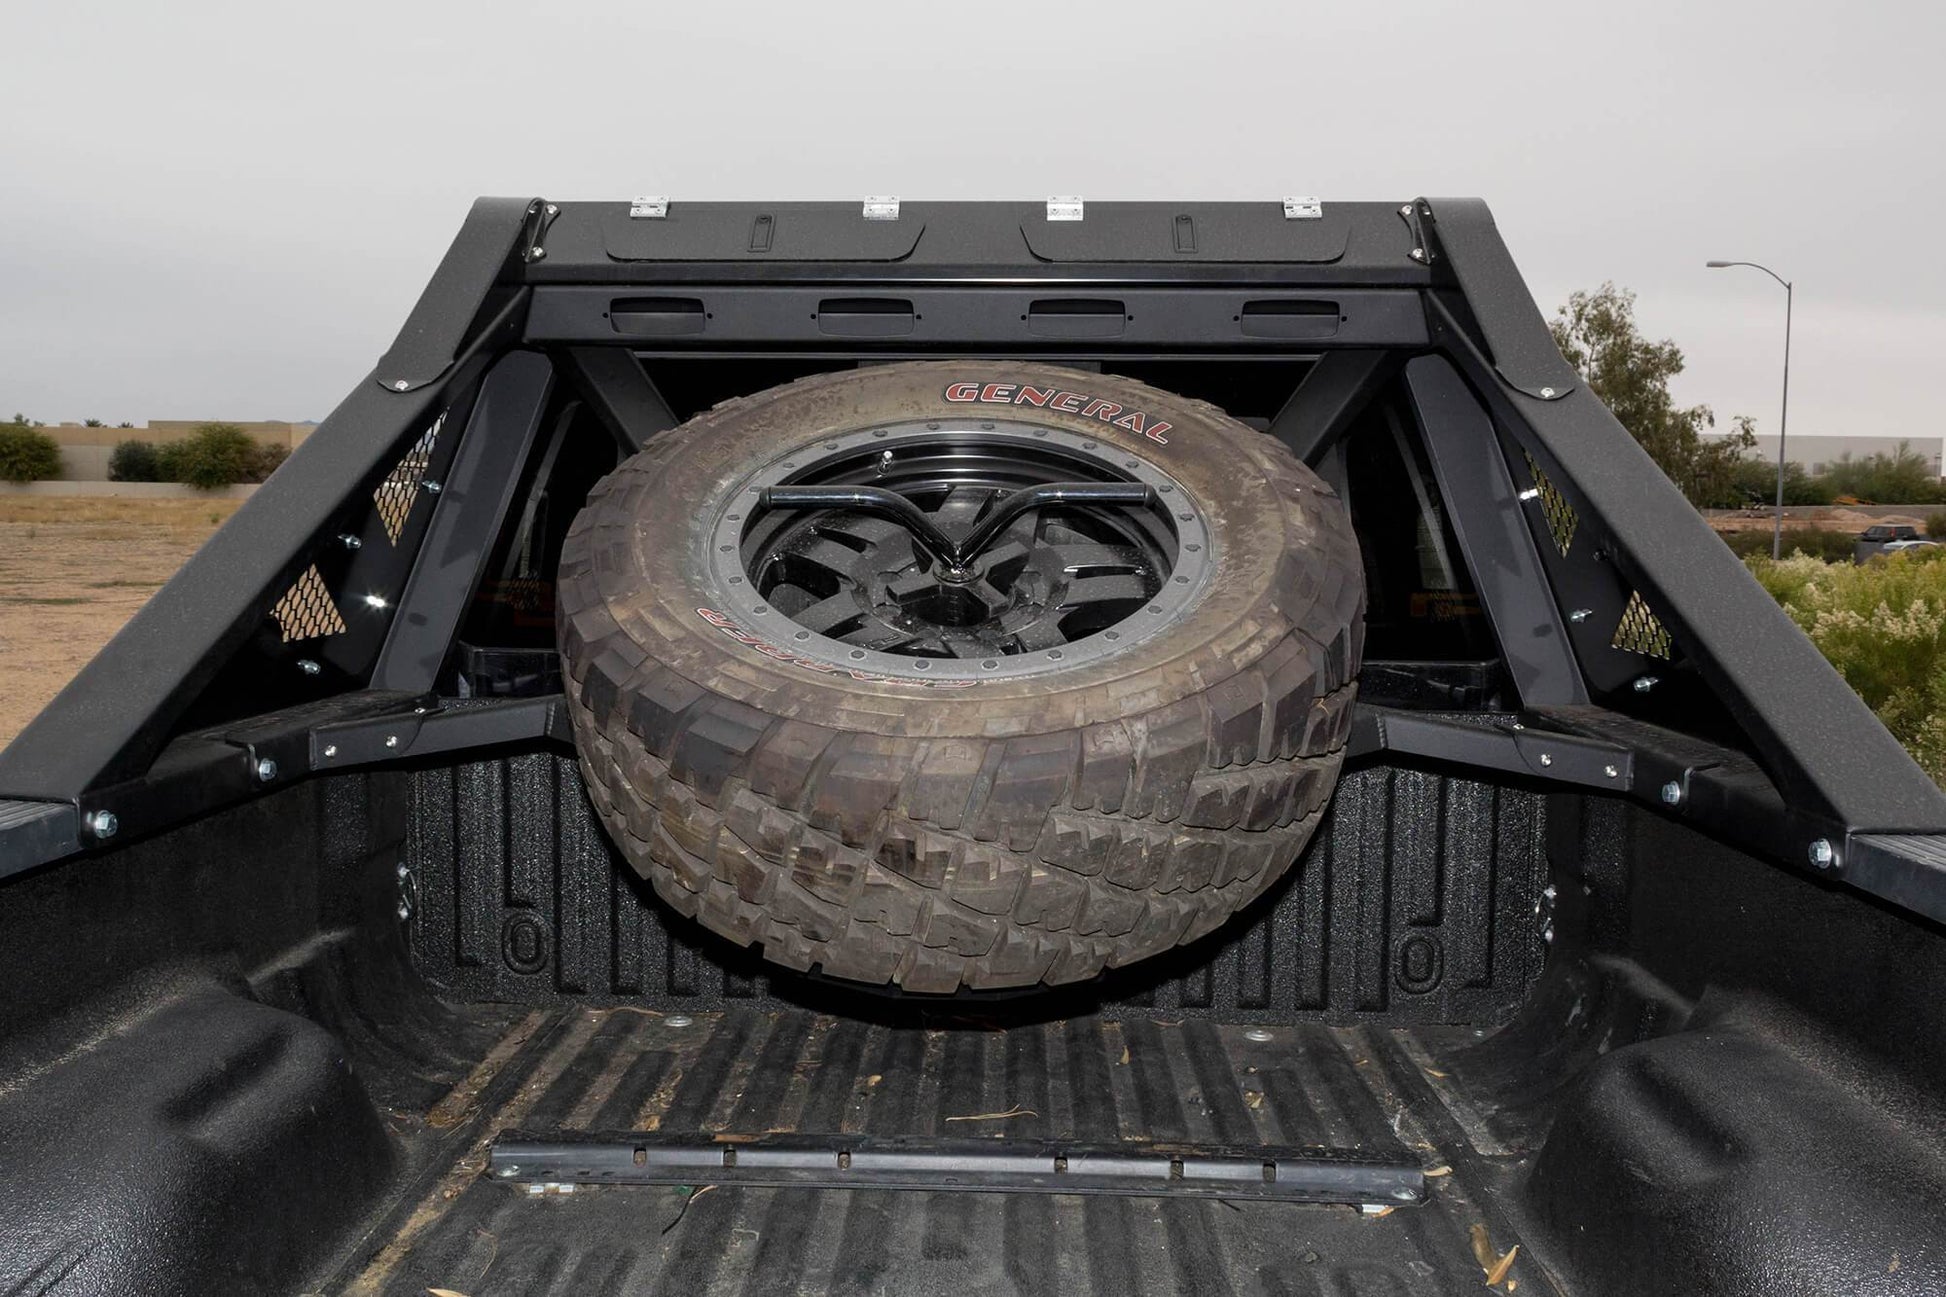 HoneyBadger Chase Rack Tire Carrier Addictive Desert DesignsC09552NA01NA - Chase Rack - Addictive Desert Designs - Texas Complete Truck Center